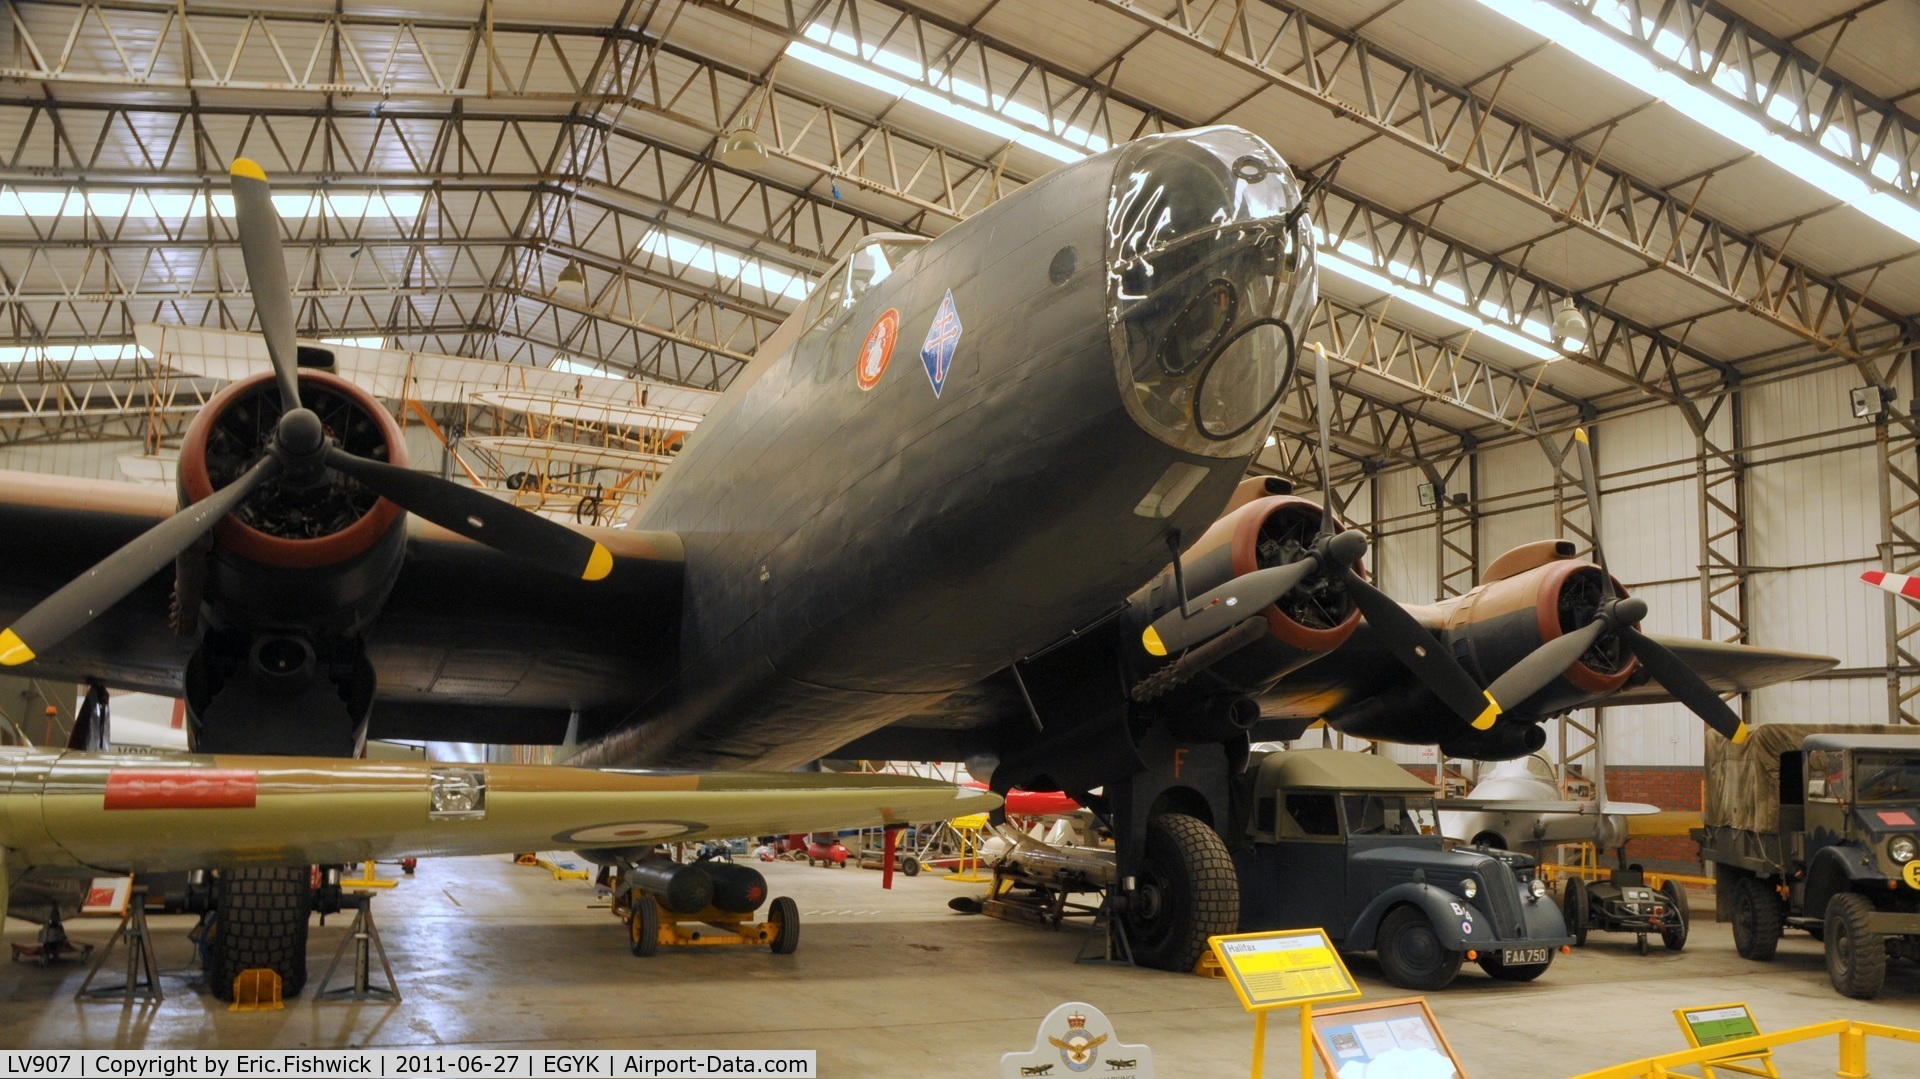 LV907, Handley Page HP-59 Halifax III C/N HR792, LV907 at Yorkshire Air Museum